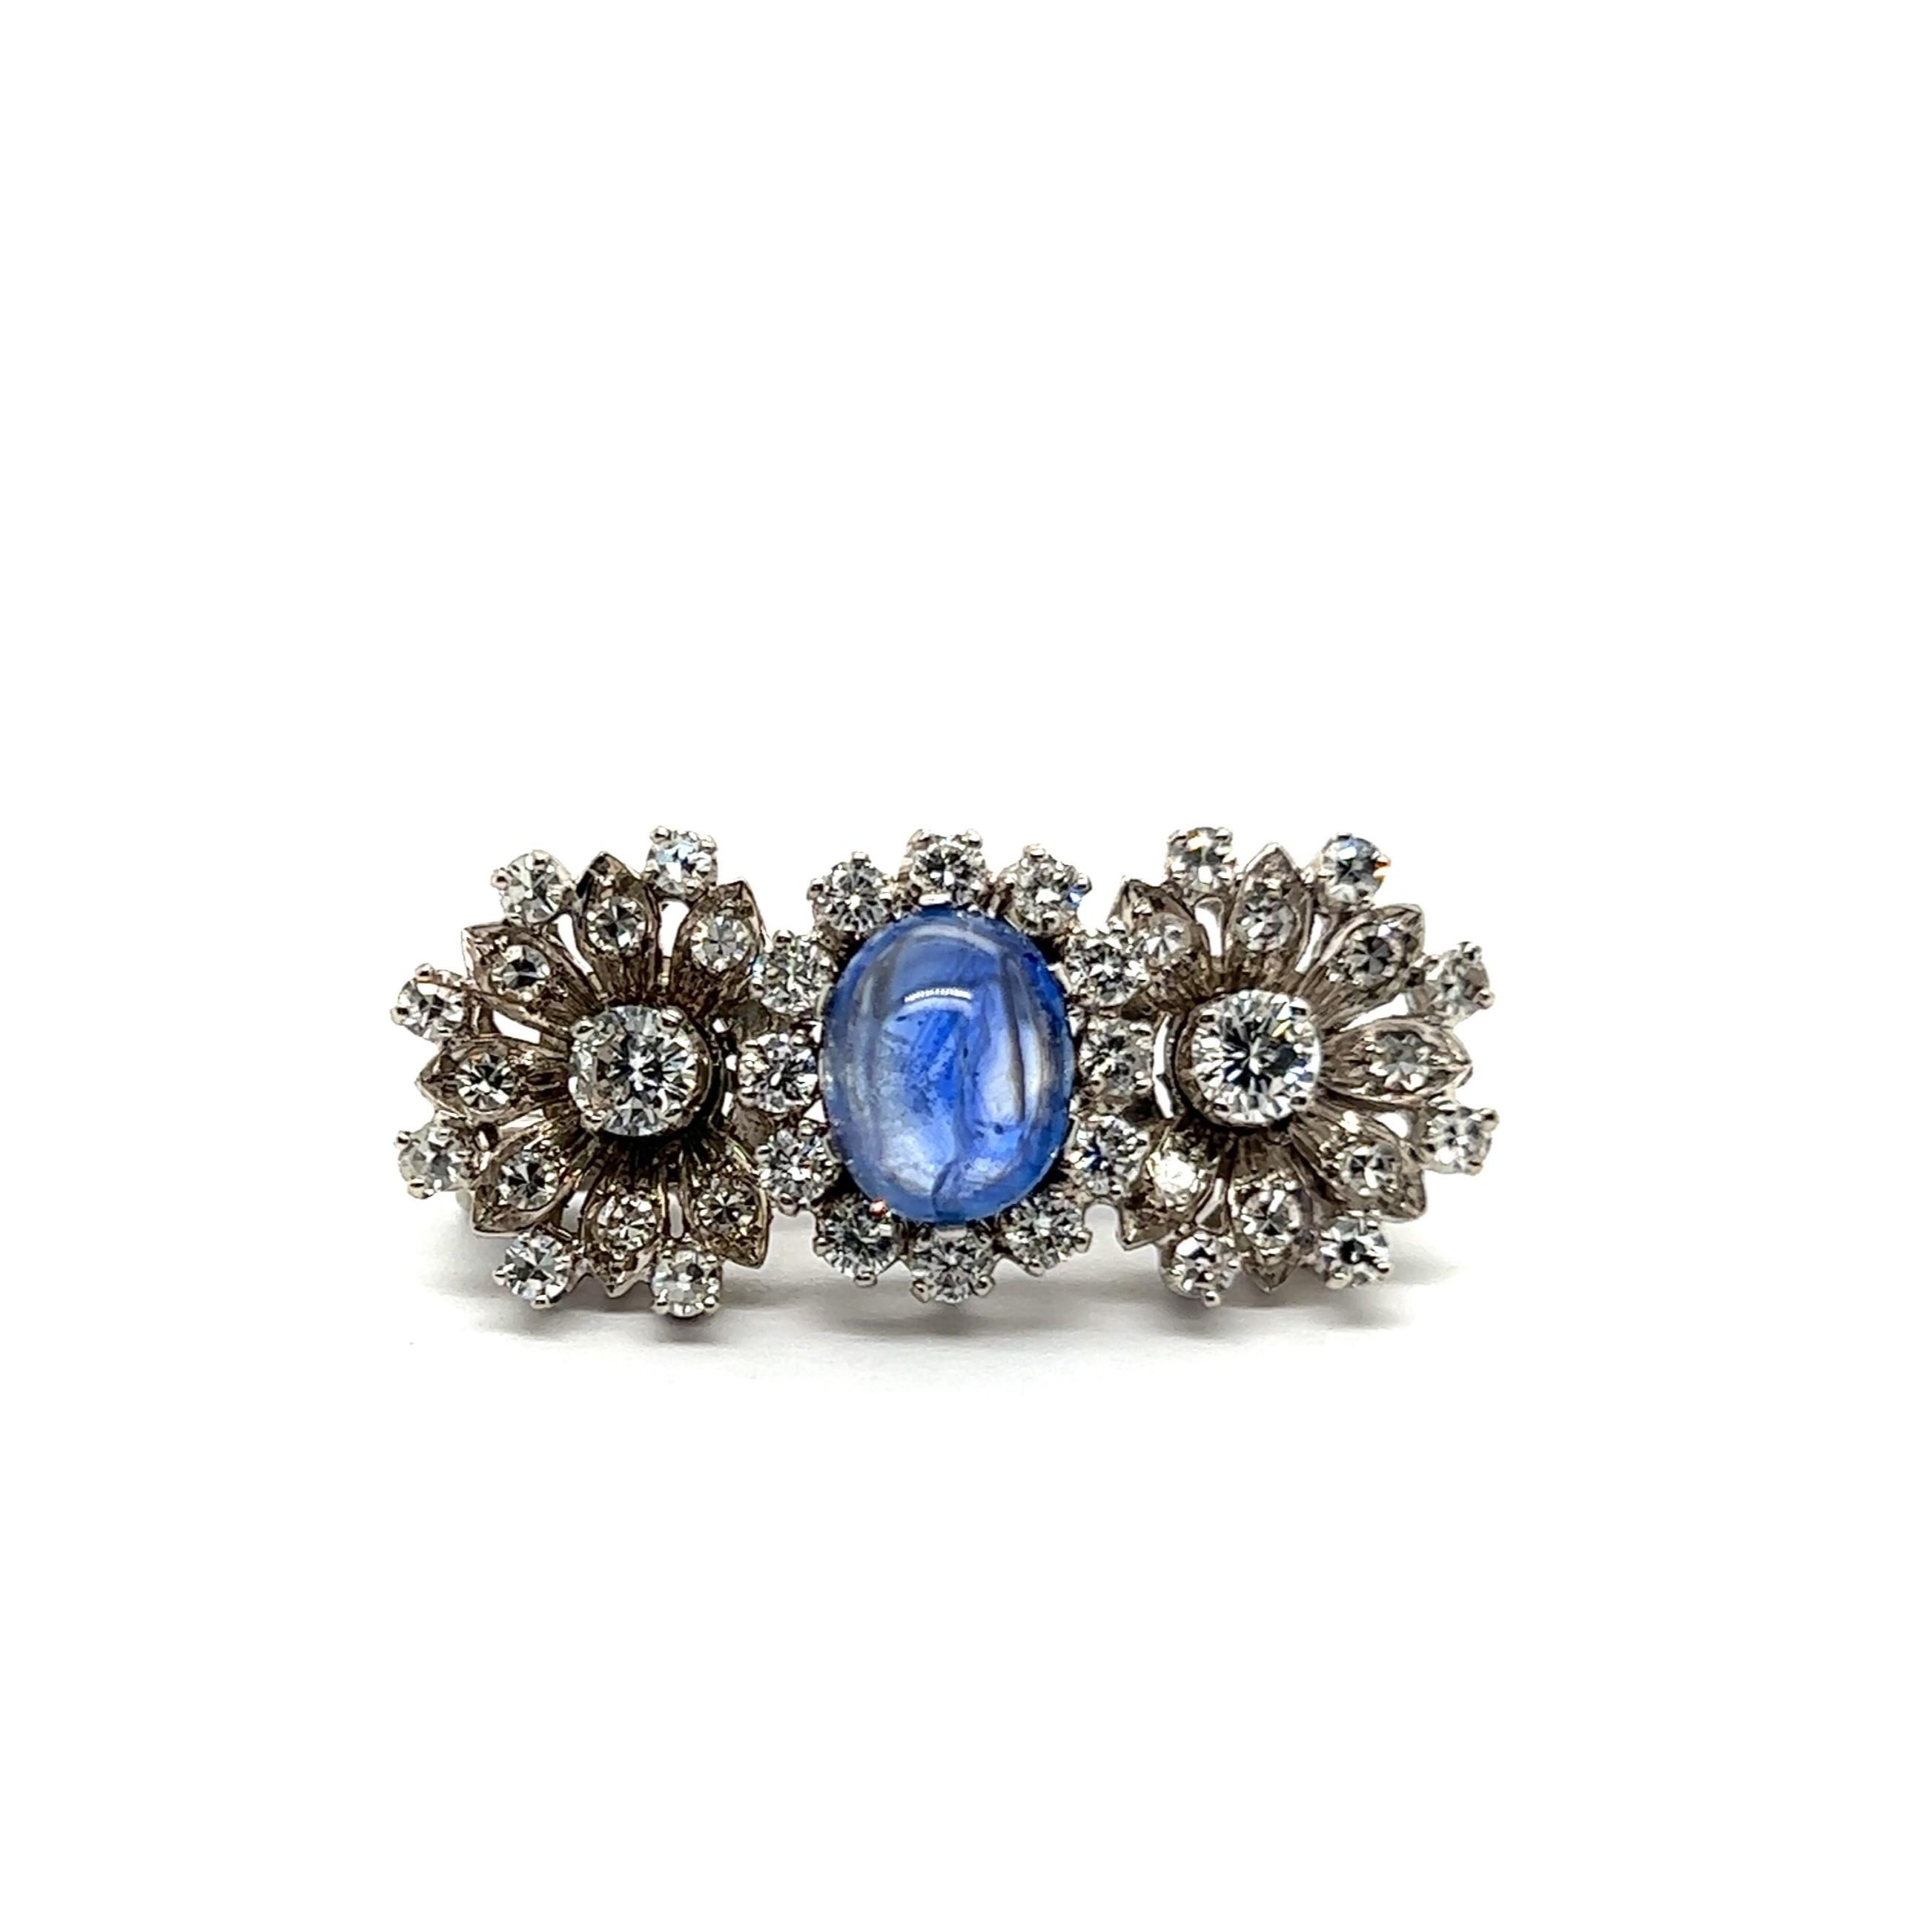 Presenting a delightful flower brooch adorned with blue sapphire and diamonds in 18 Karat white gold. 

At its centers is a 2.80-carat cabochon sapphire encircled by a halo of diamonds. Two accompanying blossoms feature two brilliants in G-H color